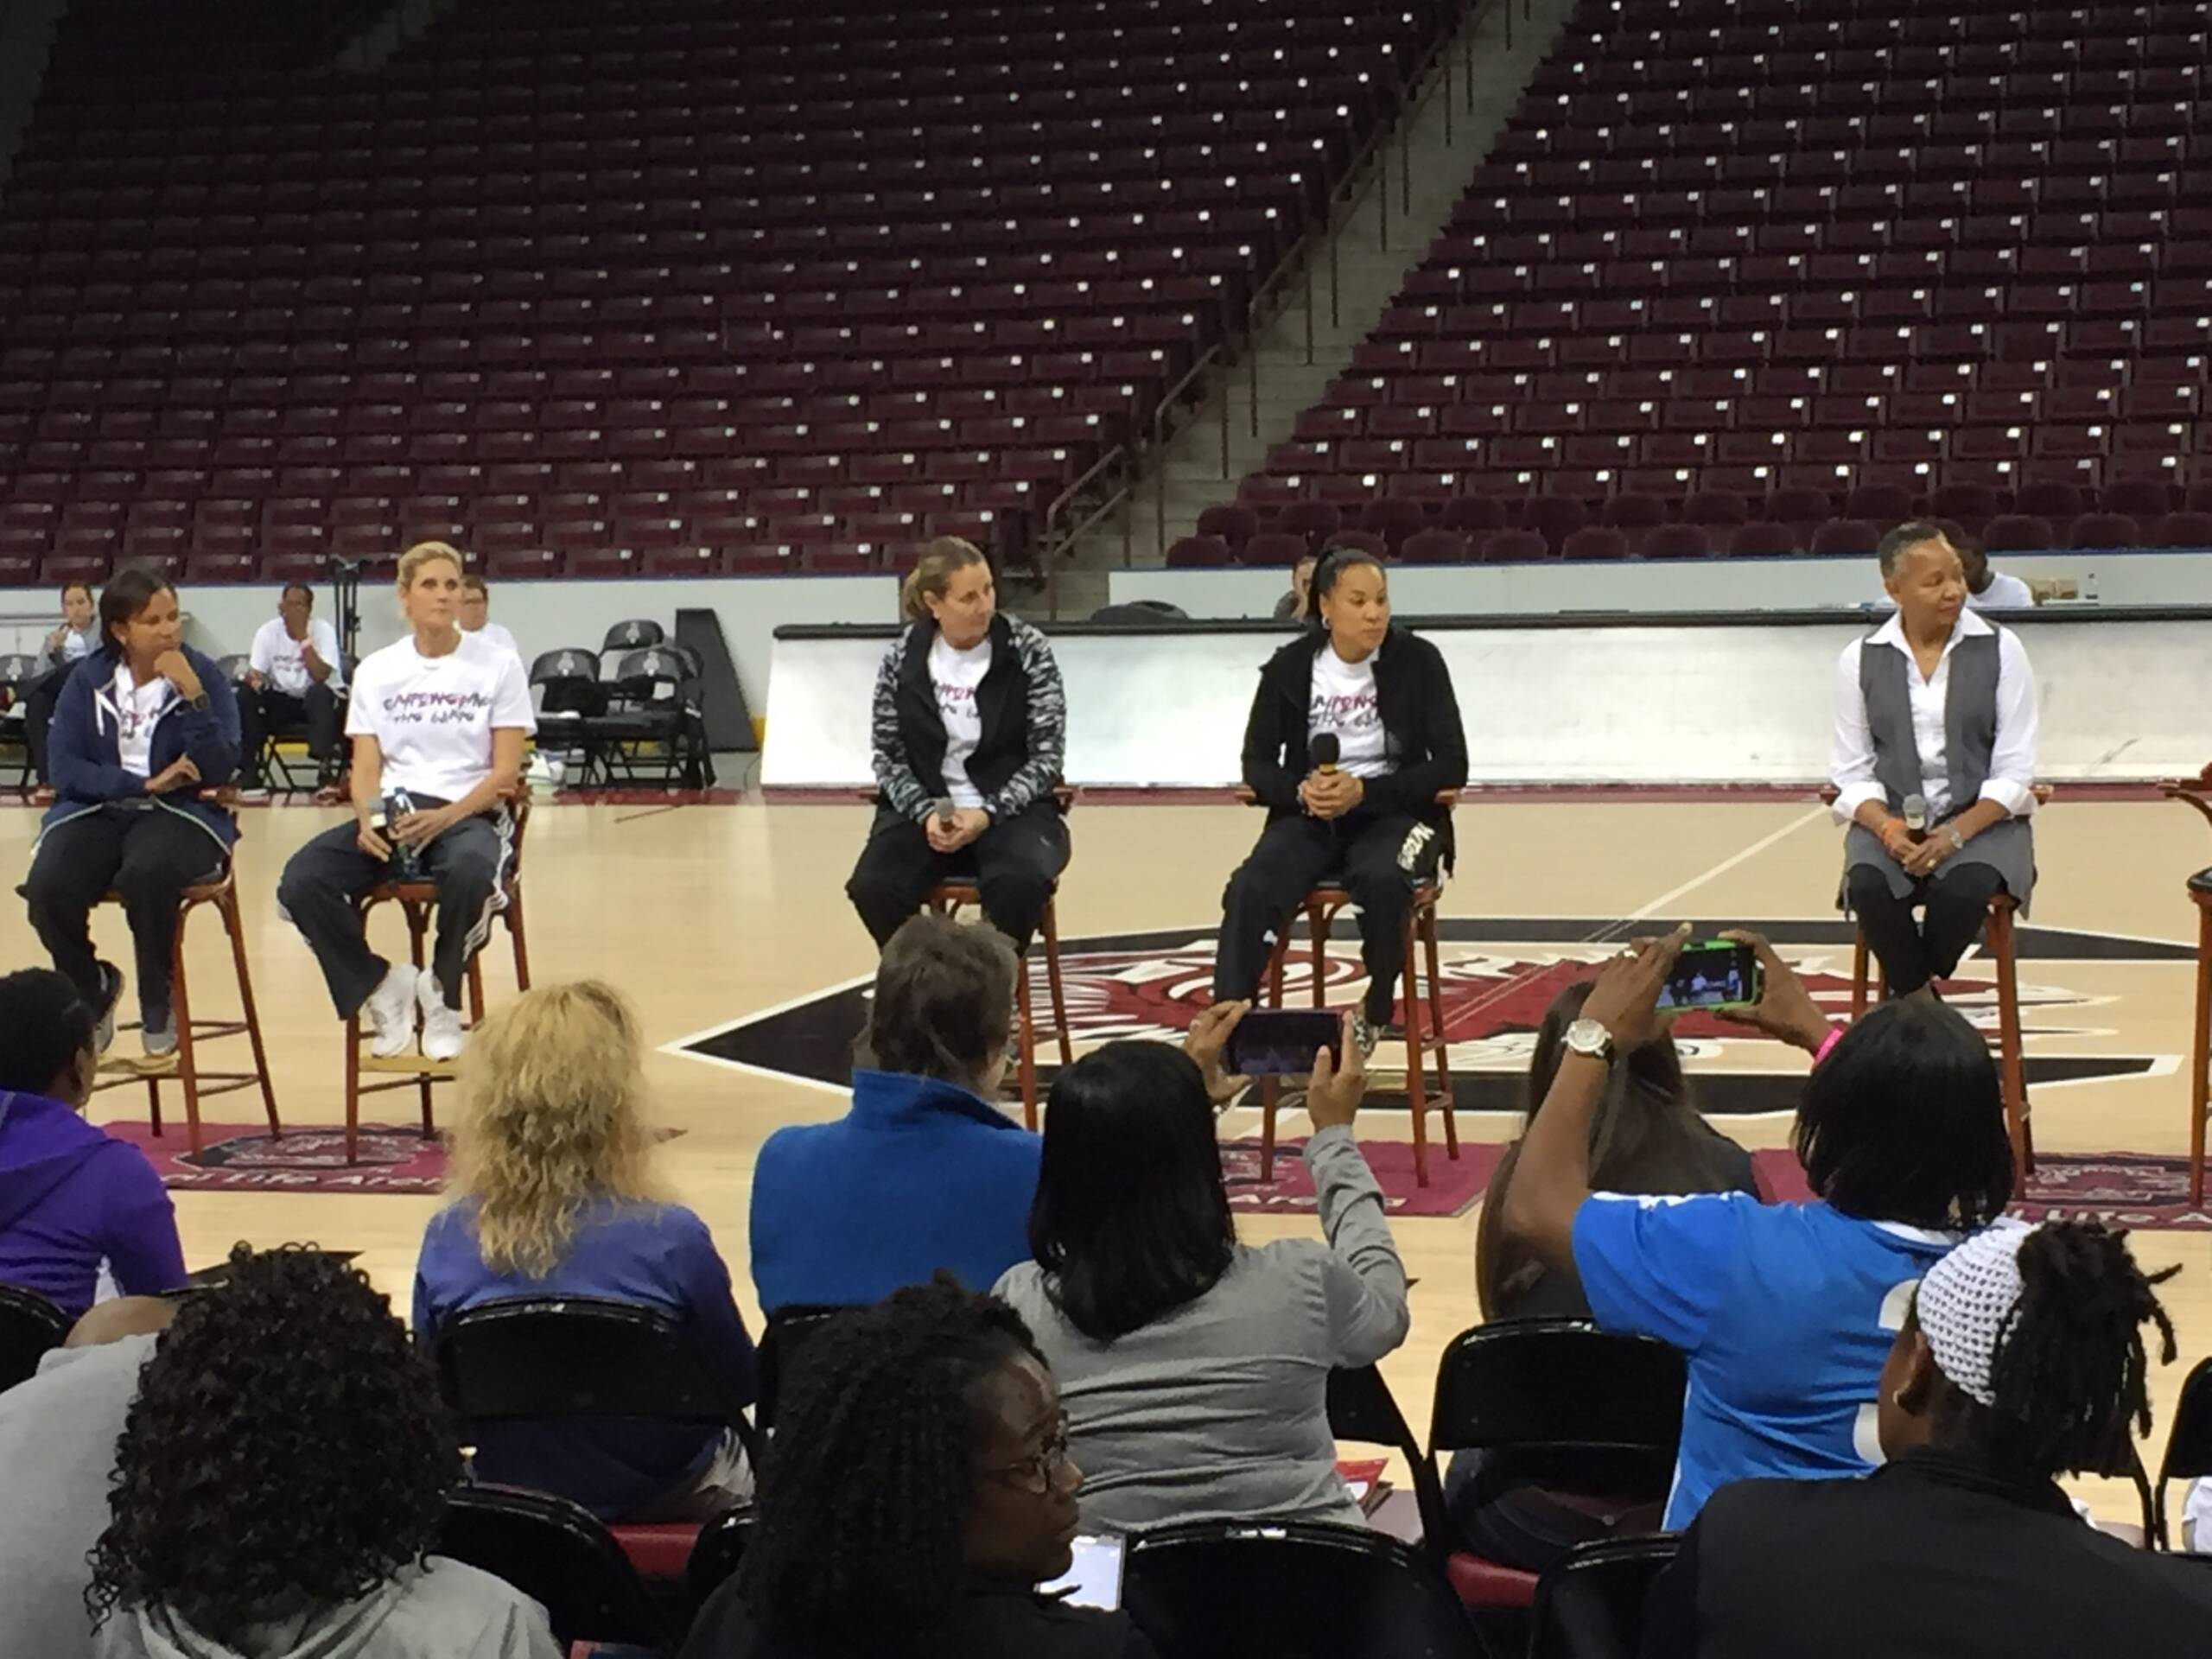 Spurs & Feathers: Women Empowering the Game coaches' clinic a can't-miss event